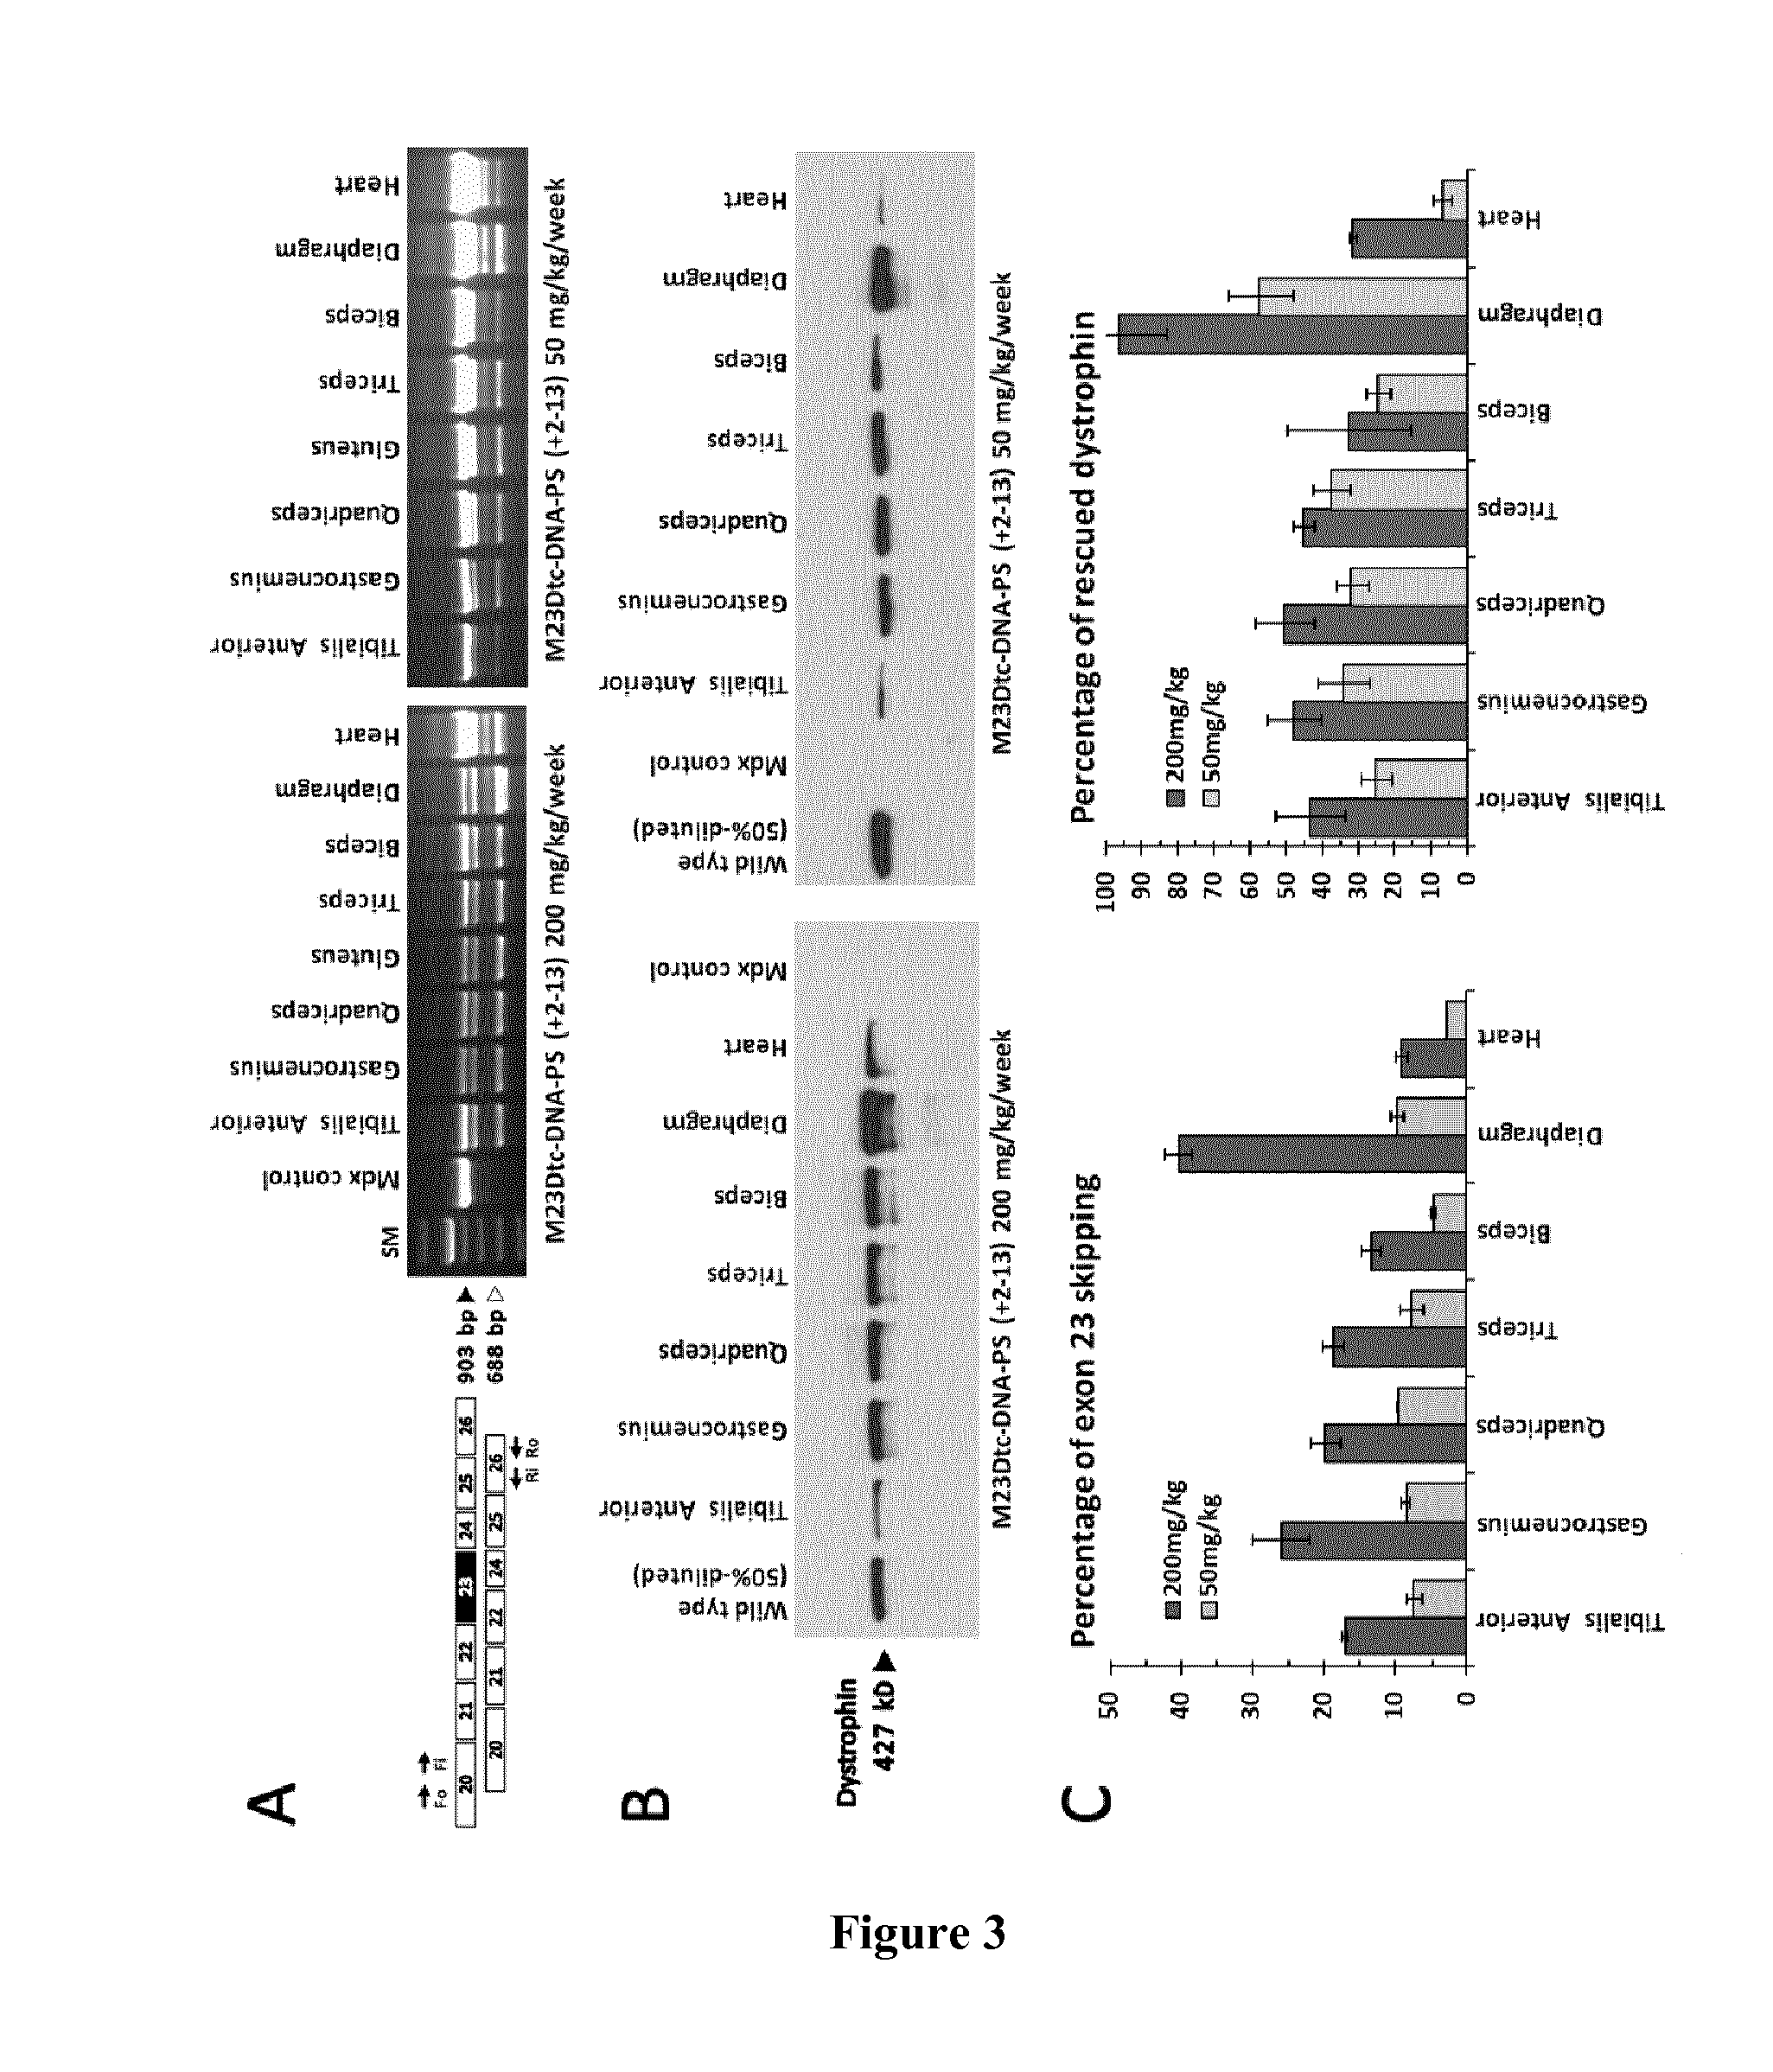 Tricyclo-phosphorothioate DNA